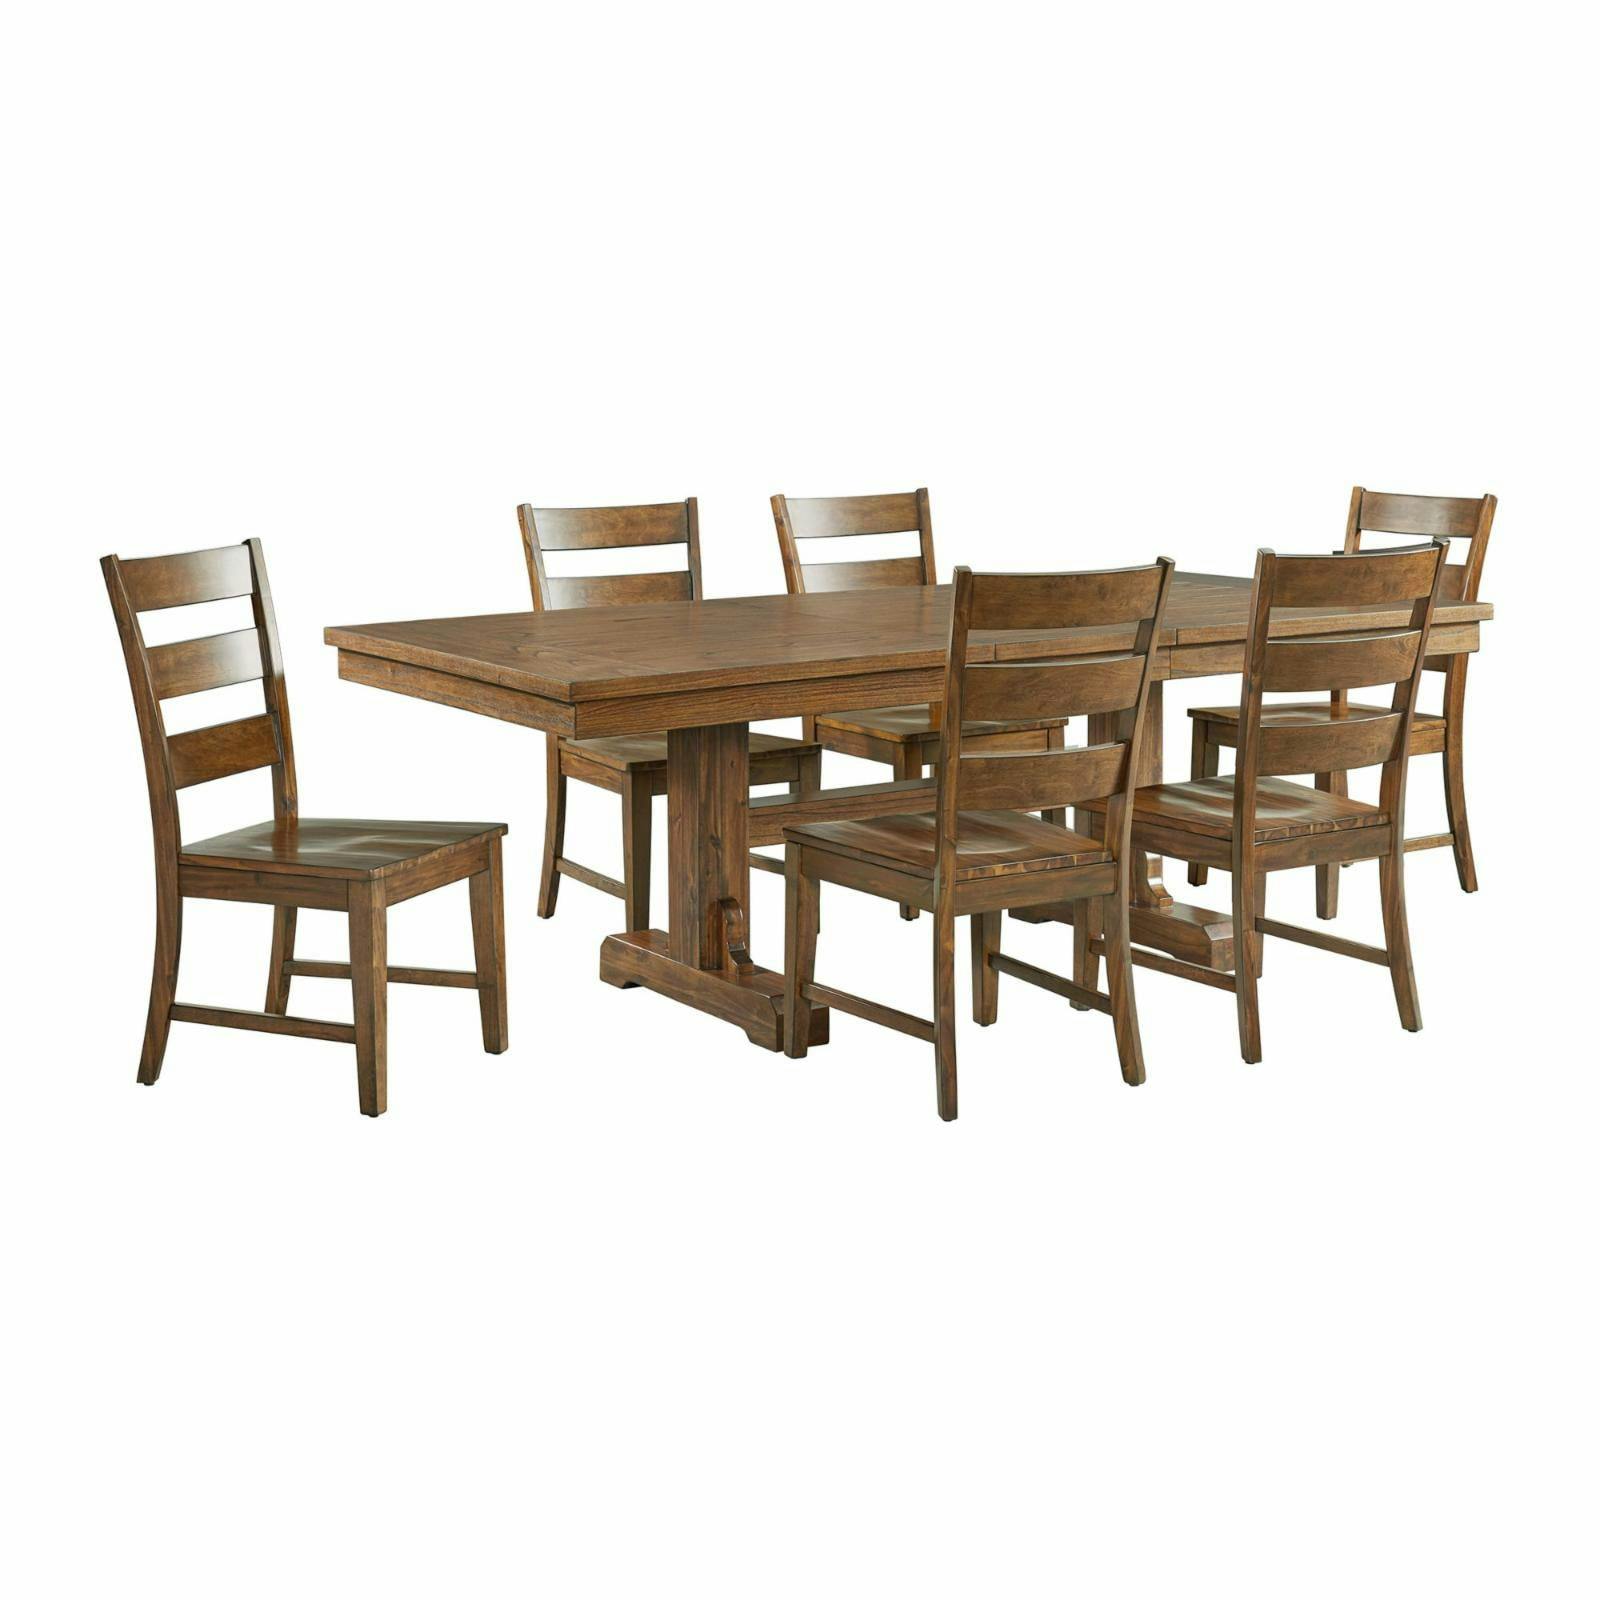 Sultan Antique Oak Extendable Dining Set with 6 Ladder Back Chairs